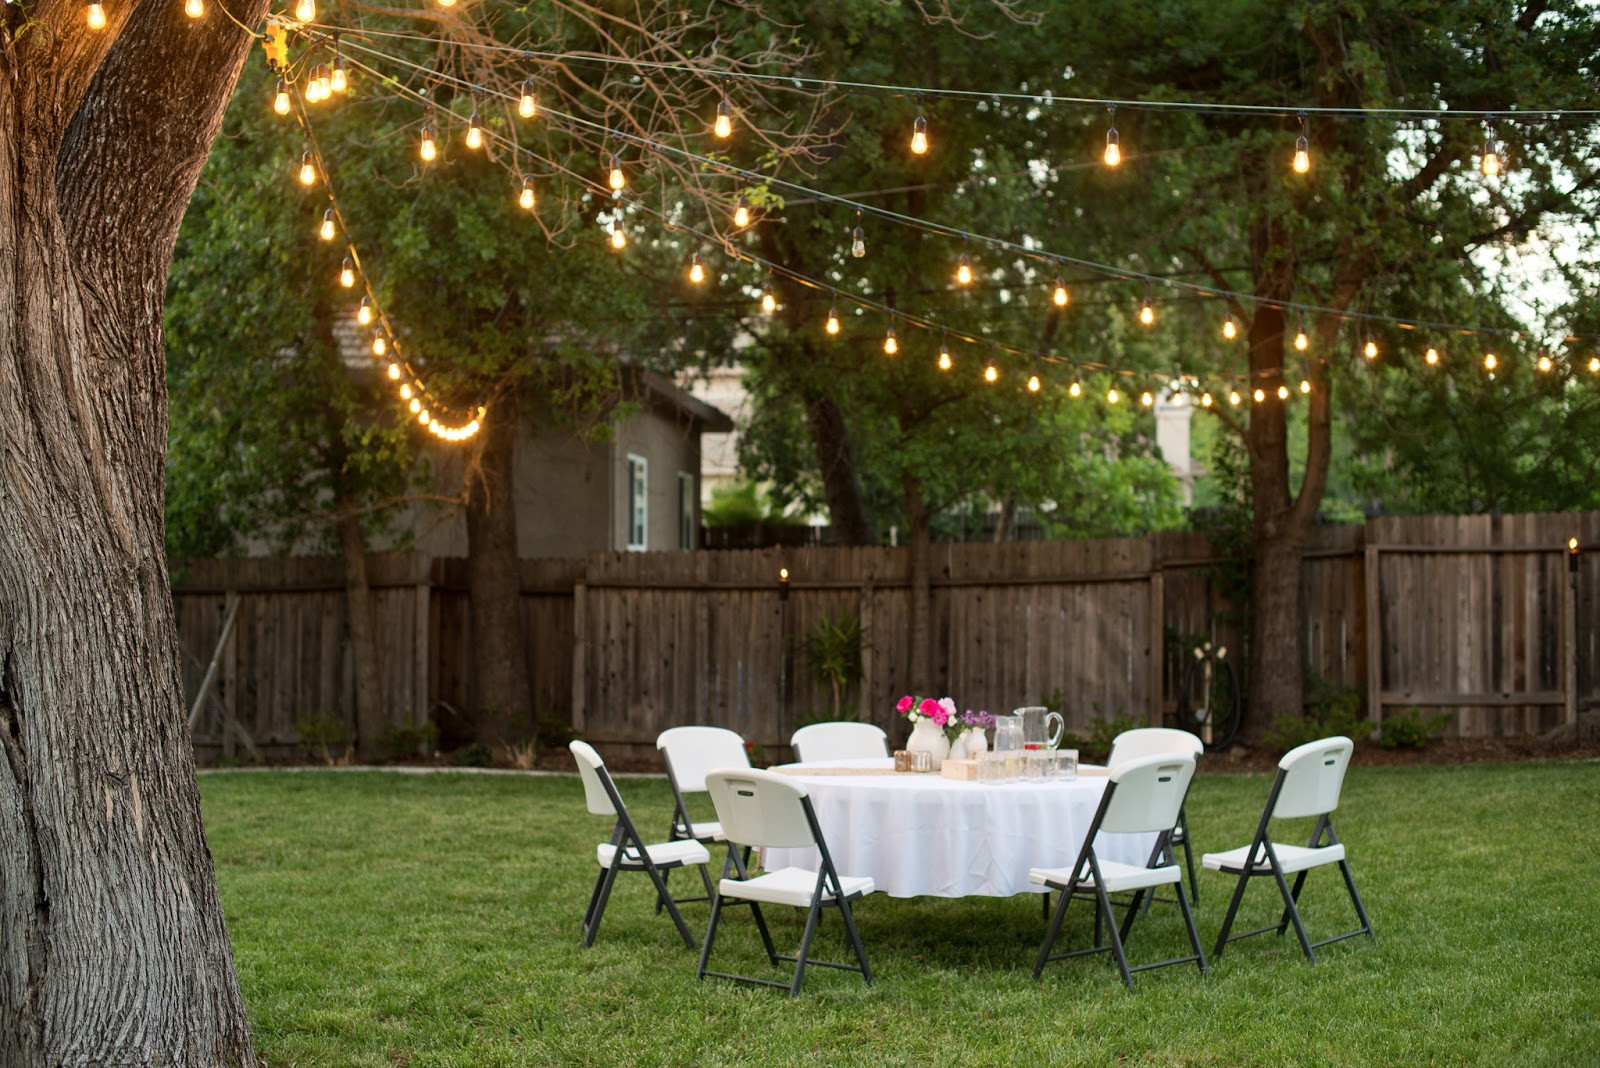 Backyard Party Ideas Adults
 Backyard Party Ideas For Adults Image — Design & Ideas